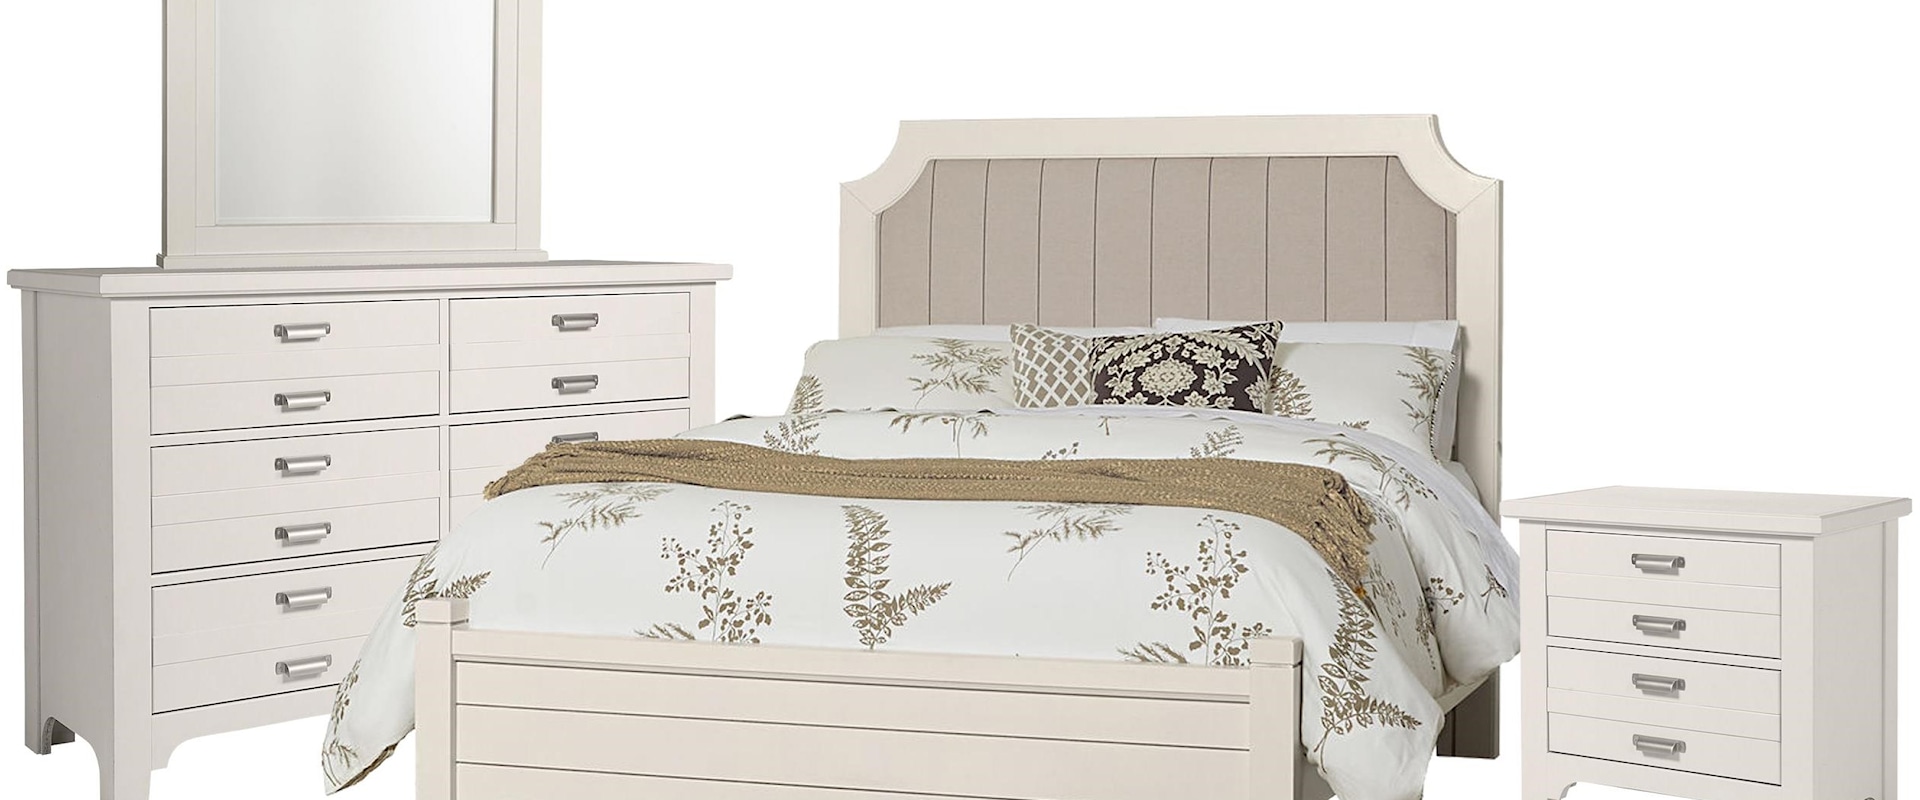 Queen Upholstered Bed, Double Dresser, Arch Mirror, 2 Drawer Nightstand